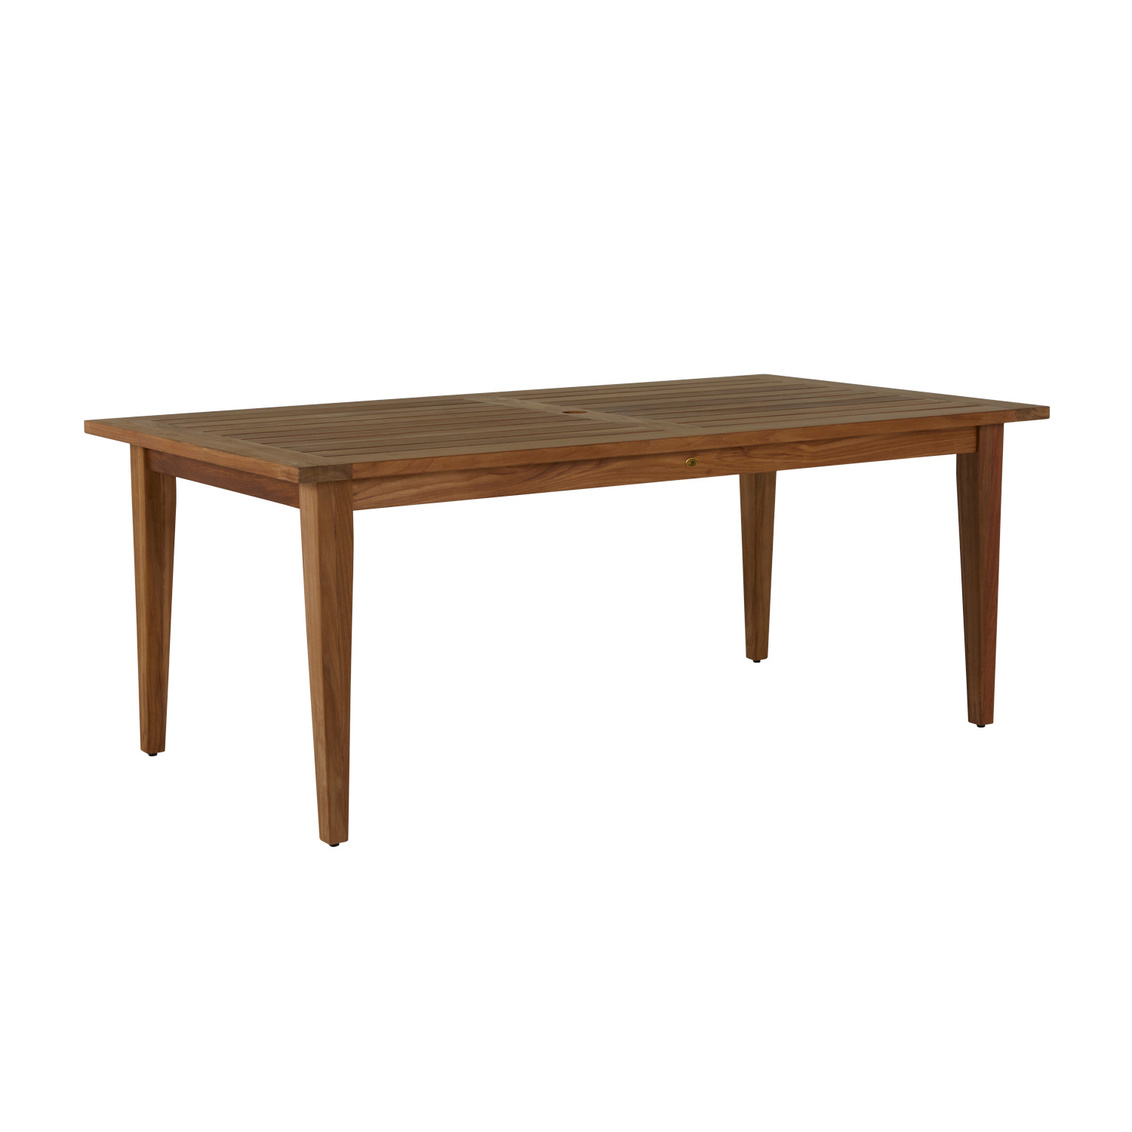 farm table rectangular in natural teak (w/ hole) product image